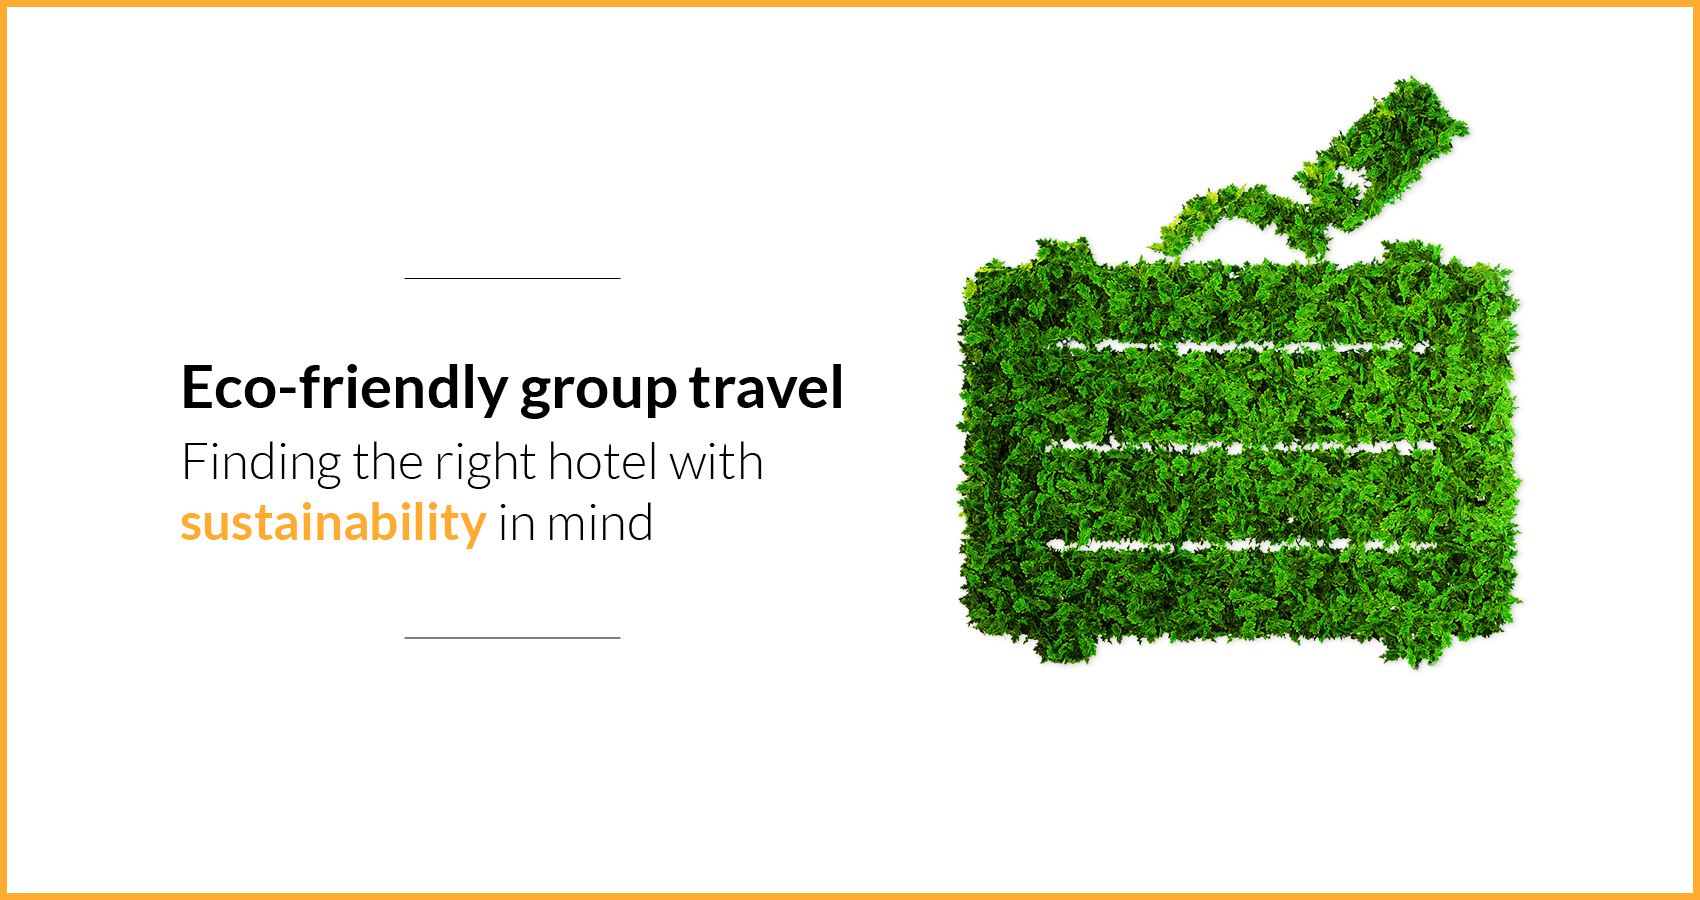 Eco-friendly group travel, finding the right hotel with sustainability in mind